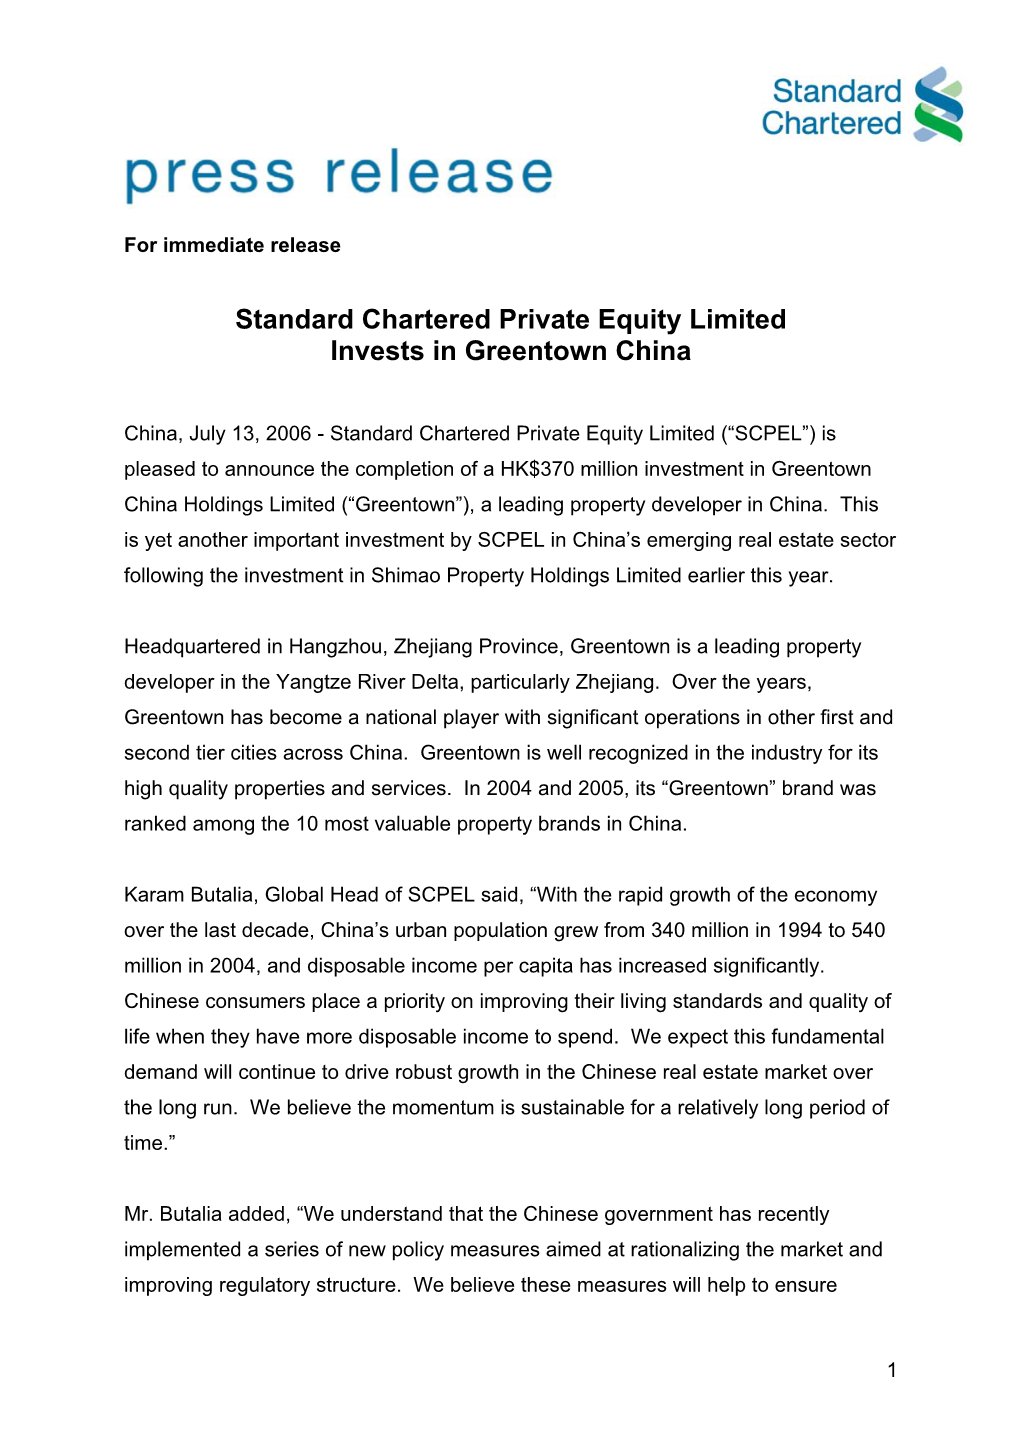 Standard Chartered Private Equity Limited Invests in Greentown China